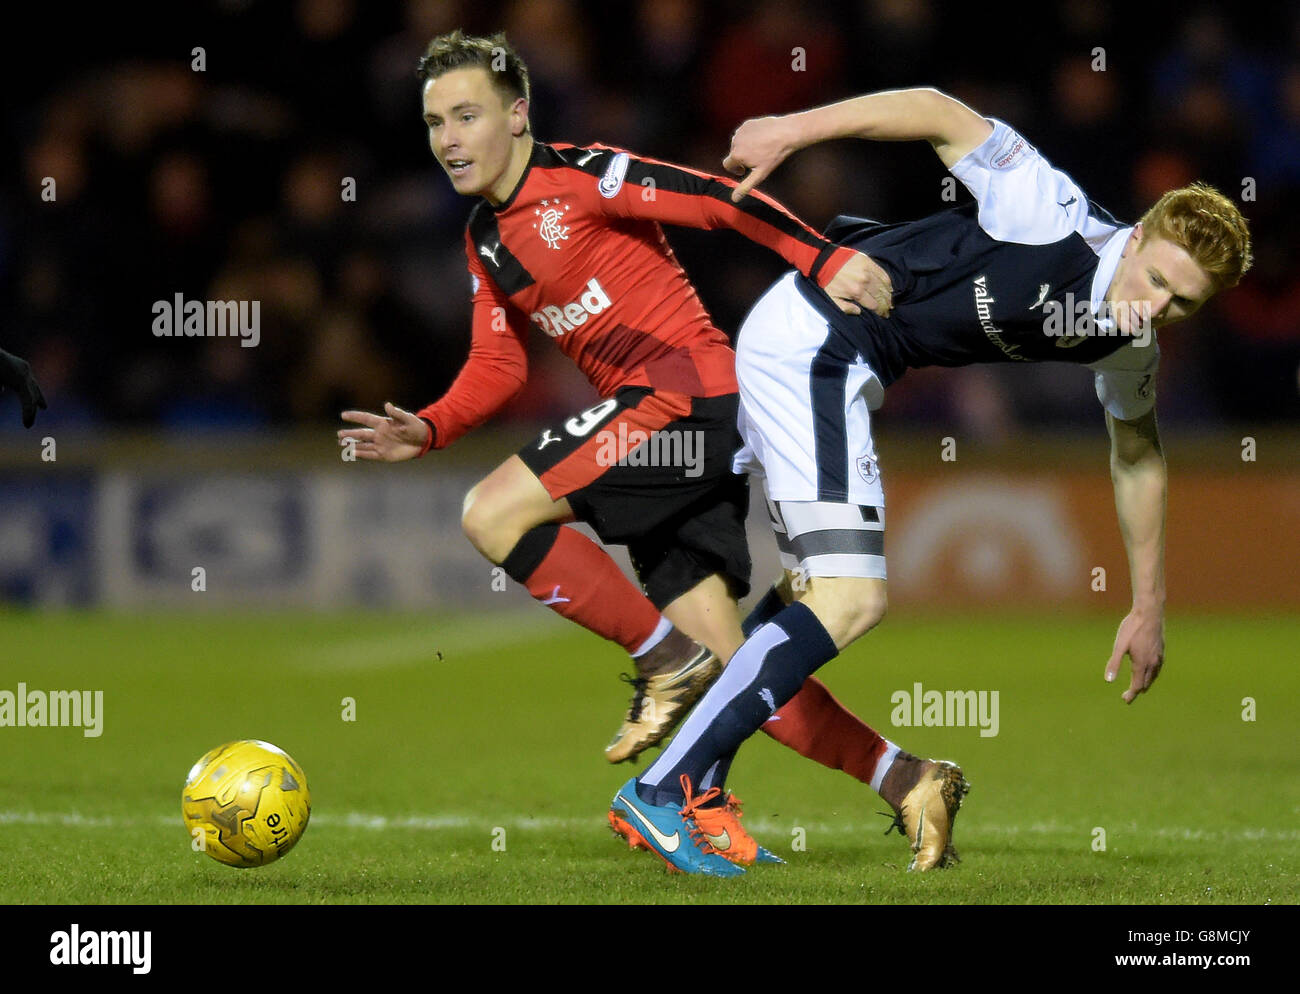 Raith Rovers' David Bates (right) and Rangers' Barry McKay battle for the ball during the Ladbrokes Scottish Championship match at Stark's Park, Kirkcaldy. Stock Photo